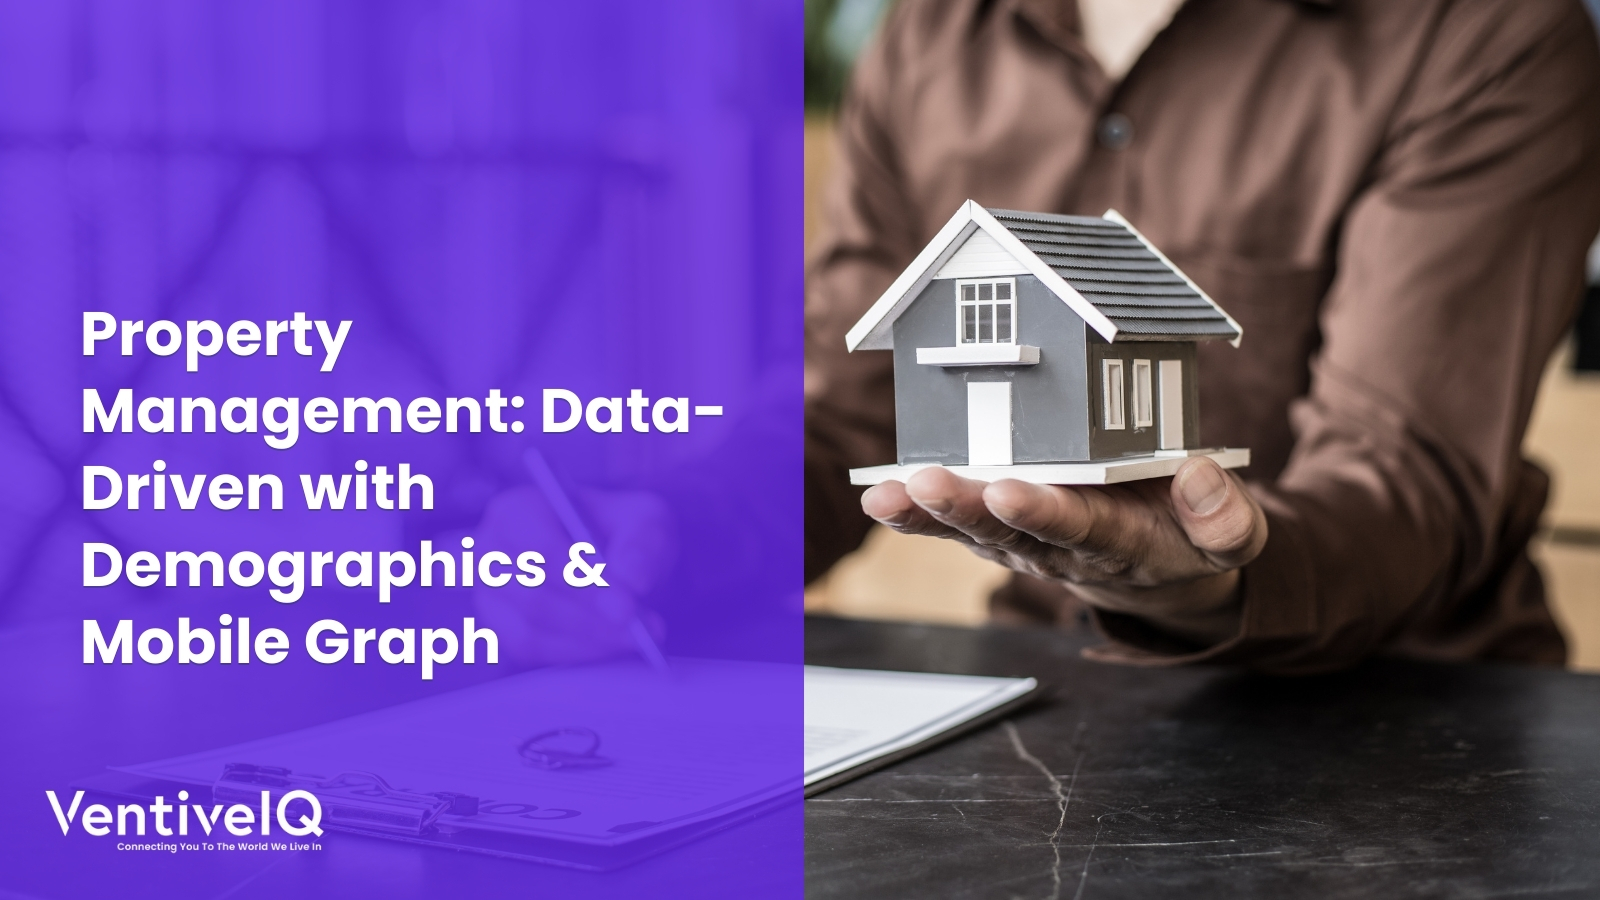 Property Management: Data-Driven with Demographics & Mobile Graph